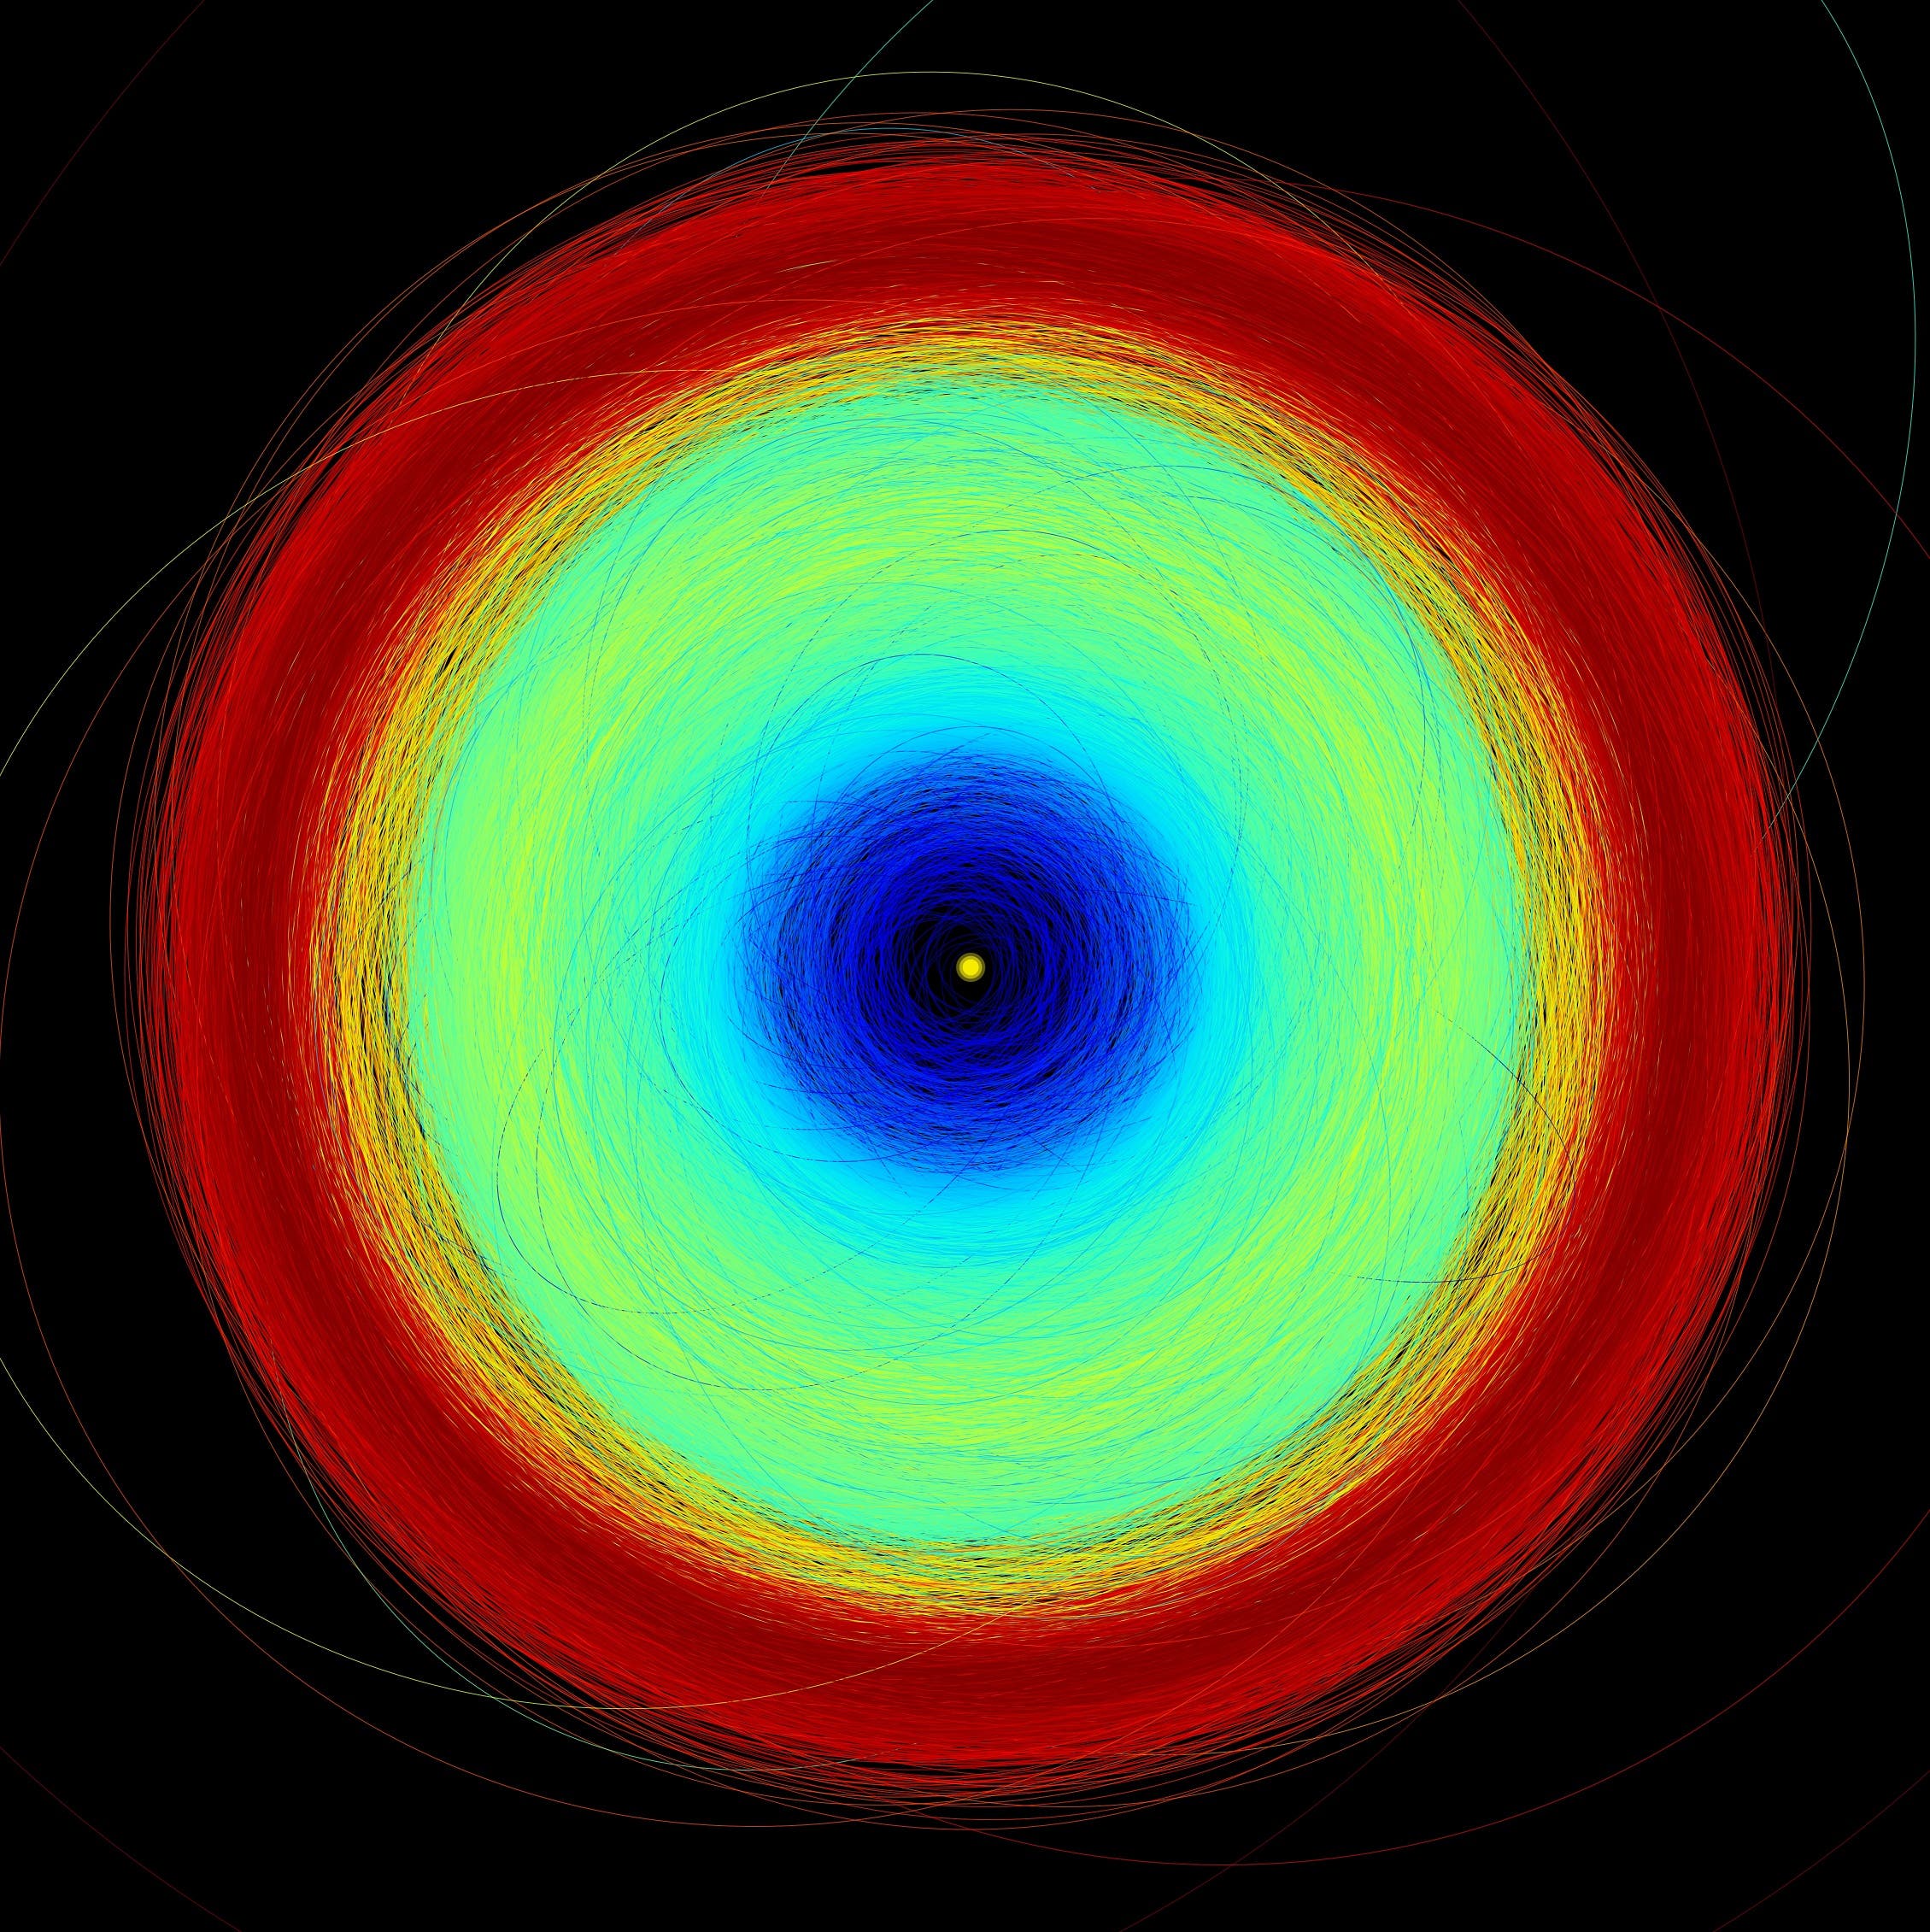 This handout image released by the European Space Agency (ESA) on June 13, 2022, made with new data collected by the ESA space probe Gaia, shows the orbits of the more than 150 000 asteroids in the data, from the inner parts of the Solar System to the Trojan asteroids at the distance of Jupiter, with different colour codes. The yellow circle at the centre represents the Sun. Blue represents the inner part of the Solar System, where the Near Earth Asteroids, Mars crossers, and terrestrial planets are. The Main Belt, between Mars and Jupter, is green. Jupiter trojans are red.